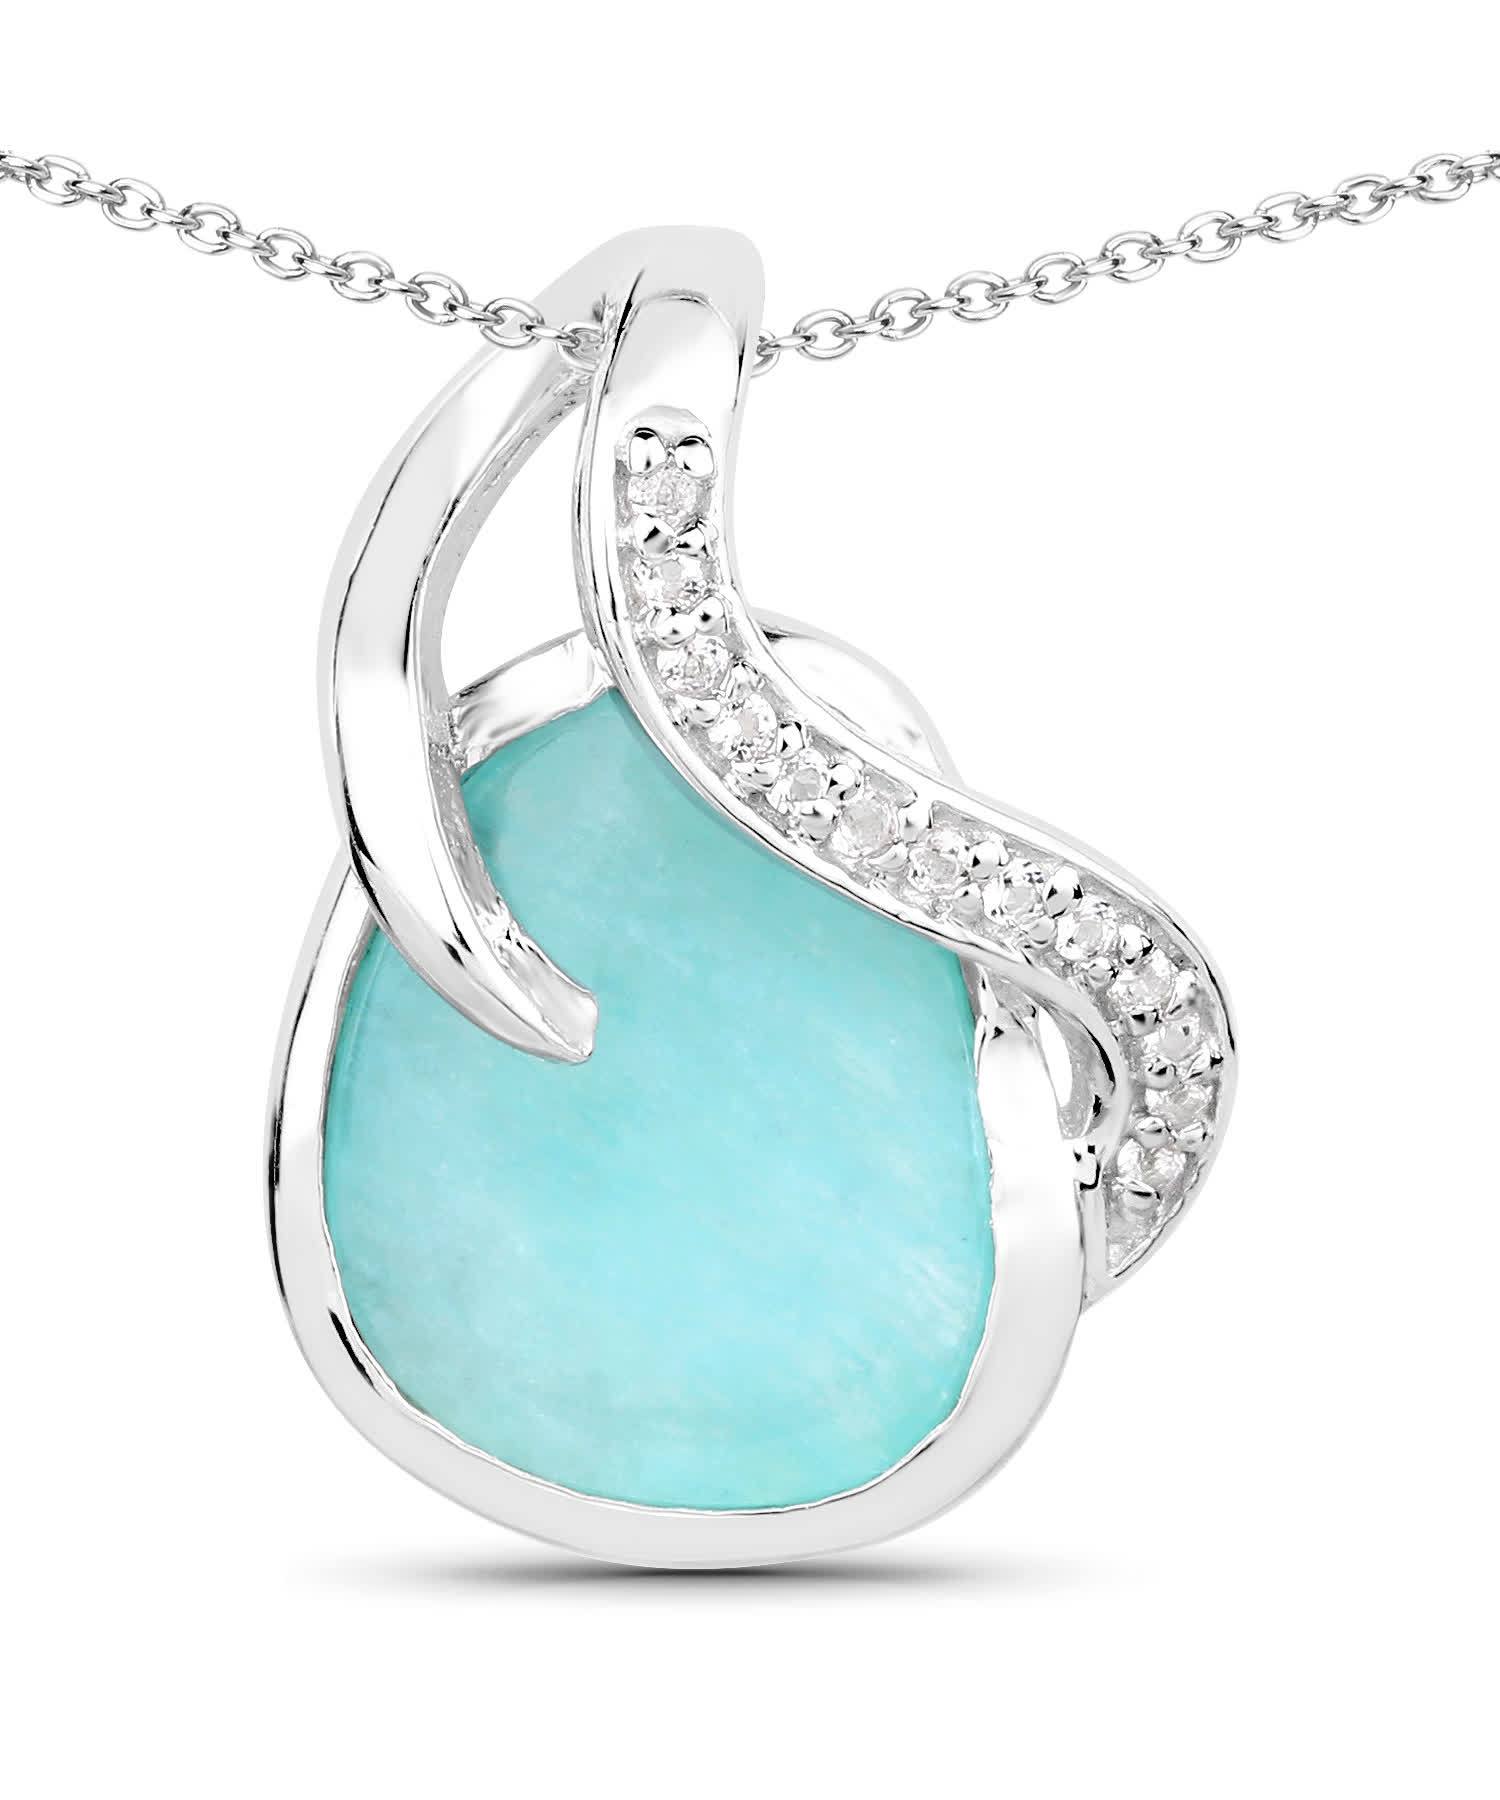 2.58ctw Natural Amazonite and White Topaz Rhodium Plated 925 Sterling Silver Pendant With Chain View 1